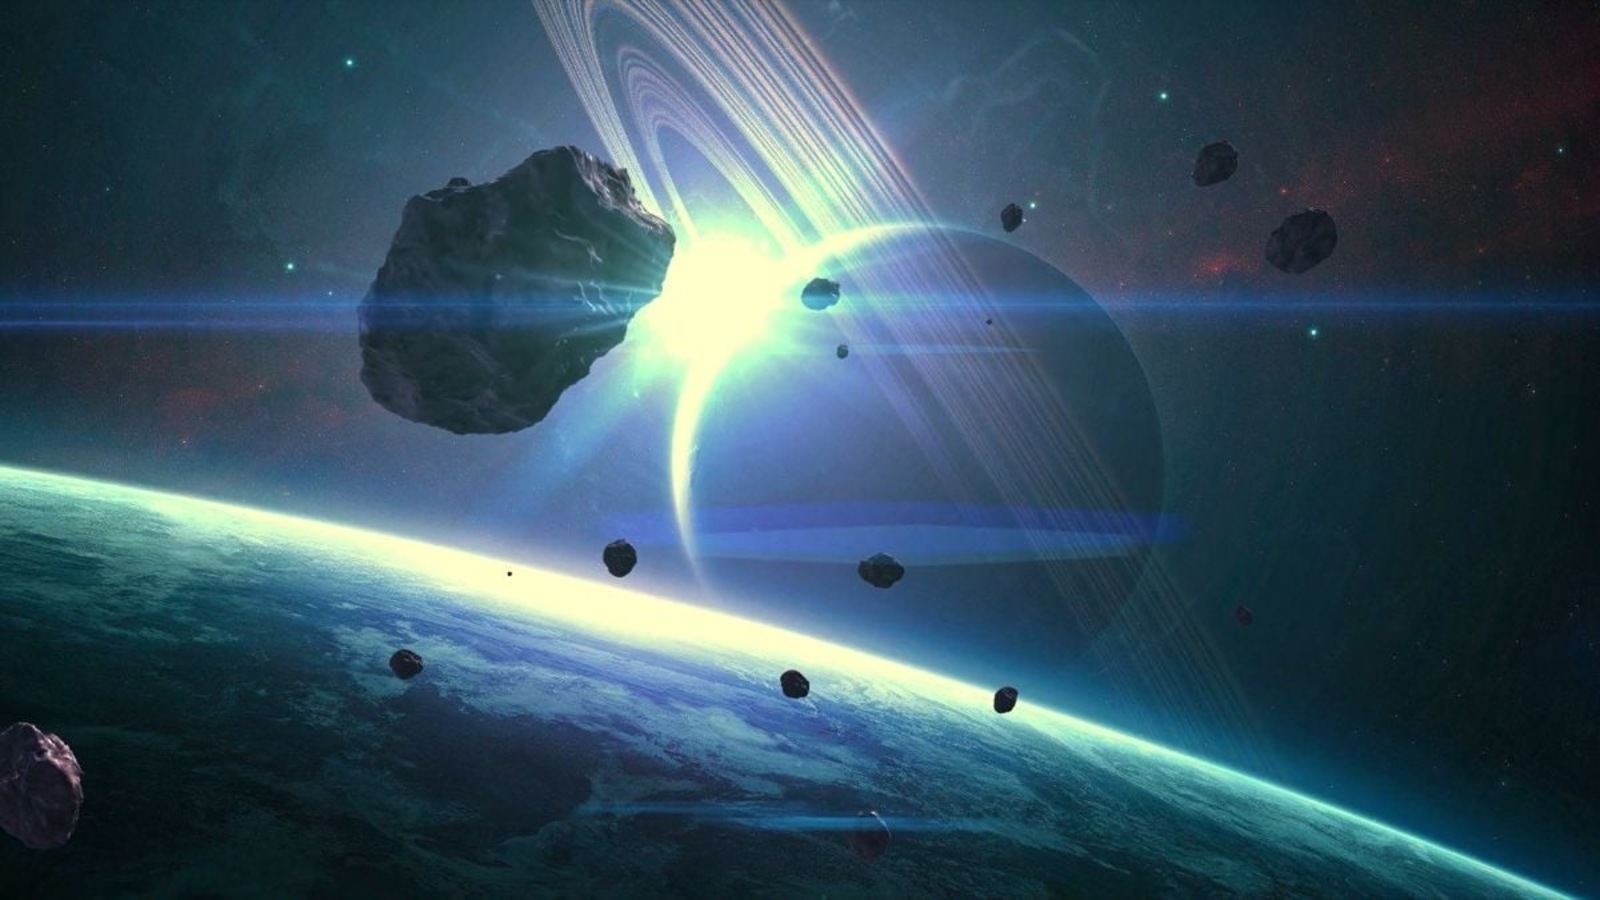 Three asteroids may fly earlier Earth now, reveals NASA Take a look at tempo, dimension, distance and extra